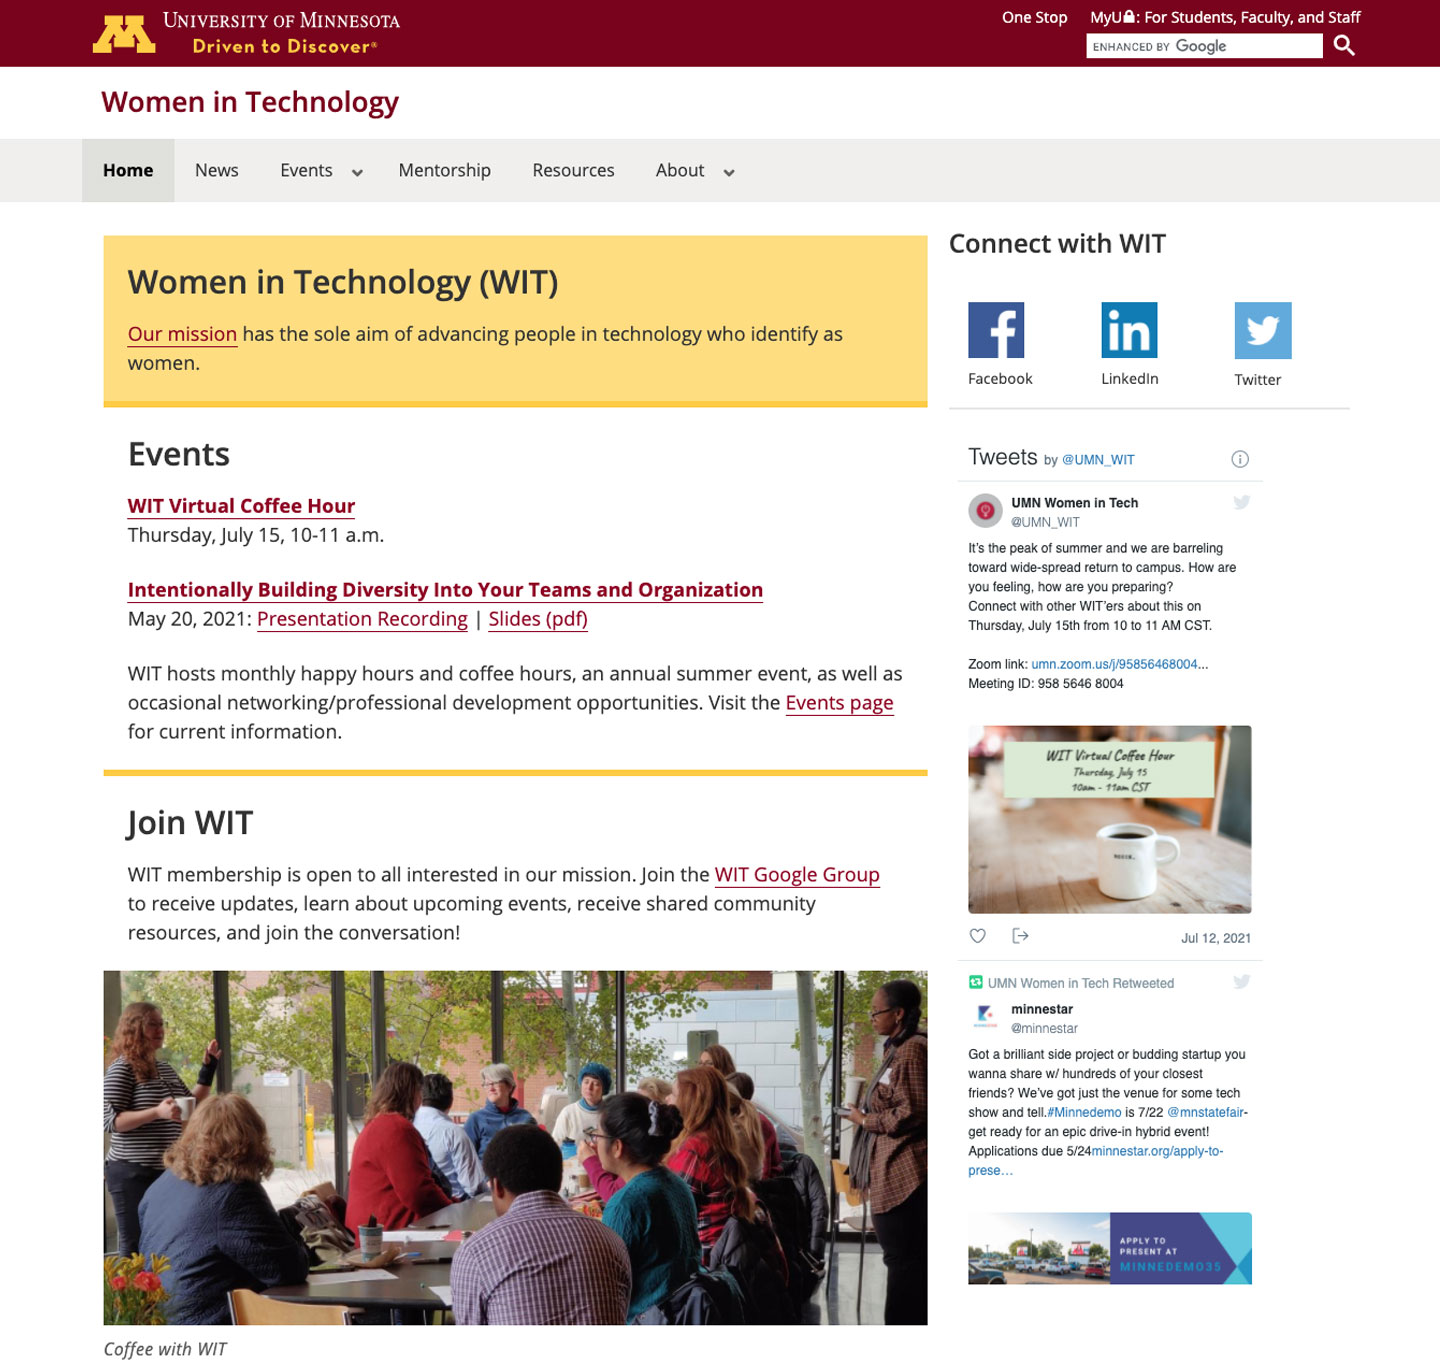 Women in Technology website home page